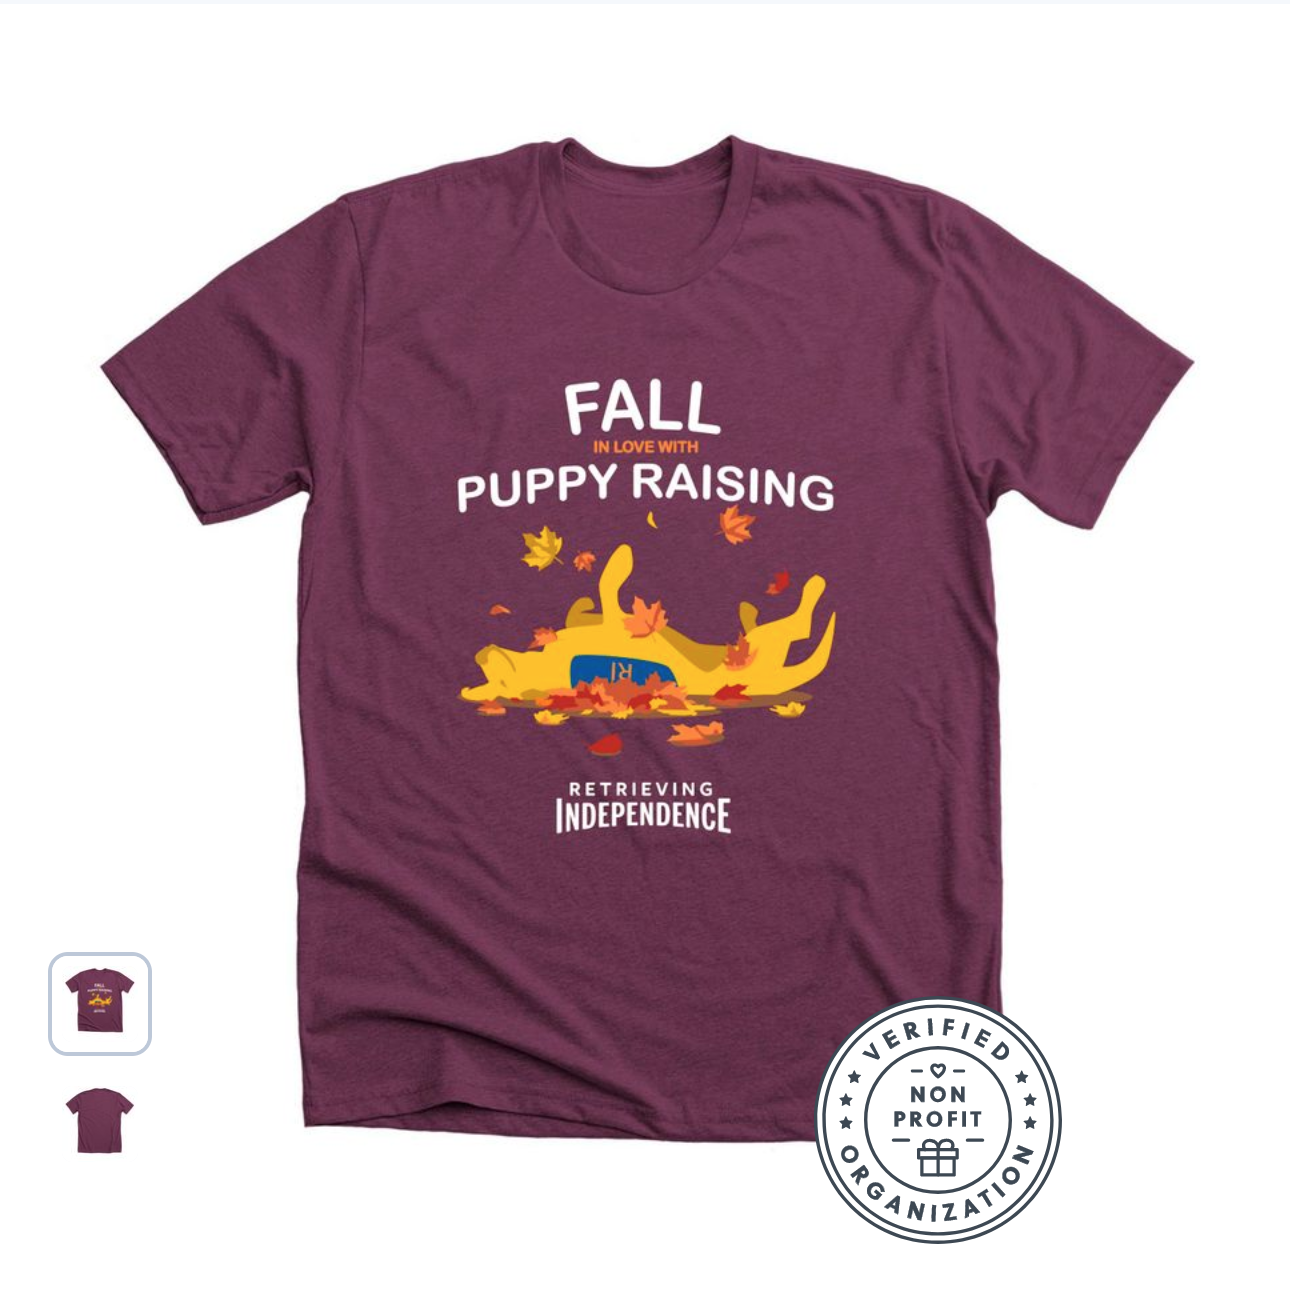 Fall in Love with Puppy Raising T-shirt in Maroon